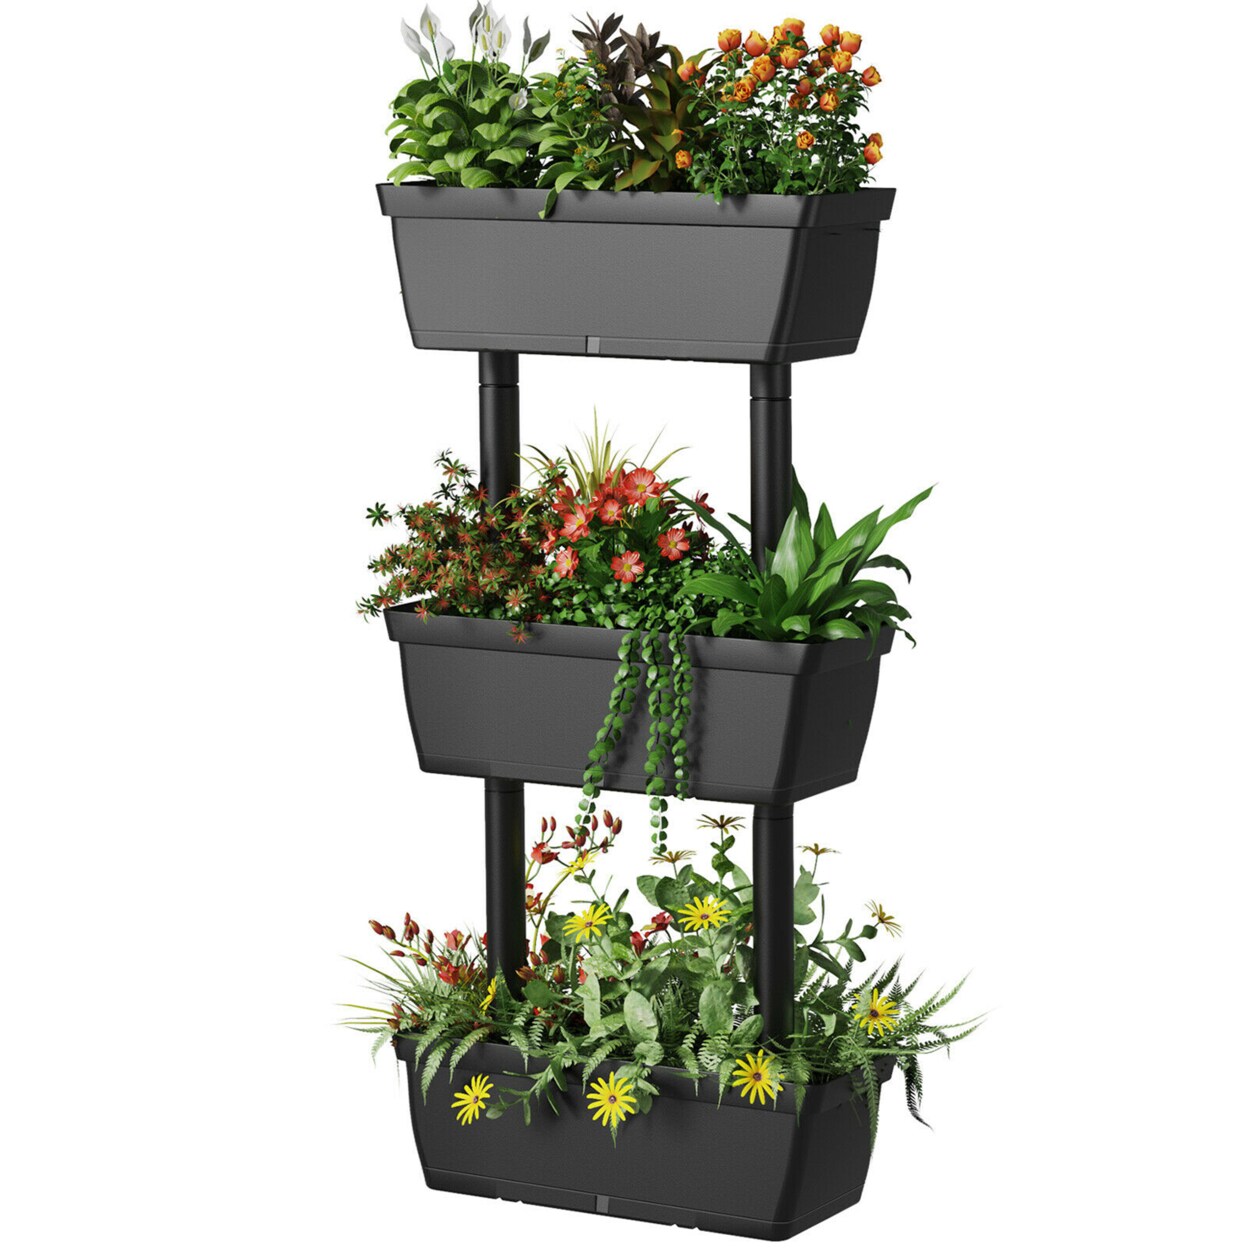 Gymax 3-Tier Raised Garden Bed Vertical Freestanding Flower Pot Stand Planter Boxes